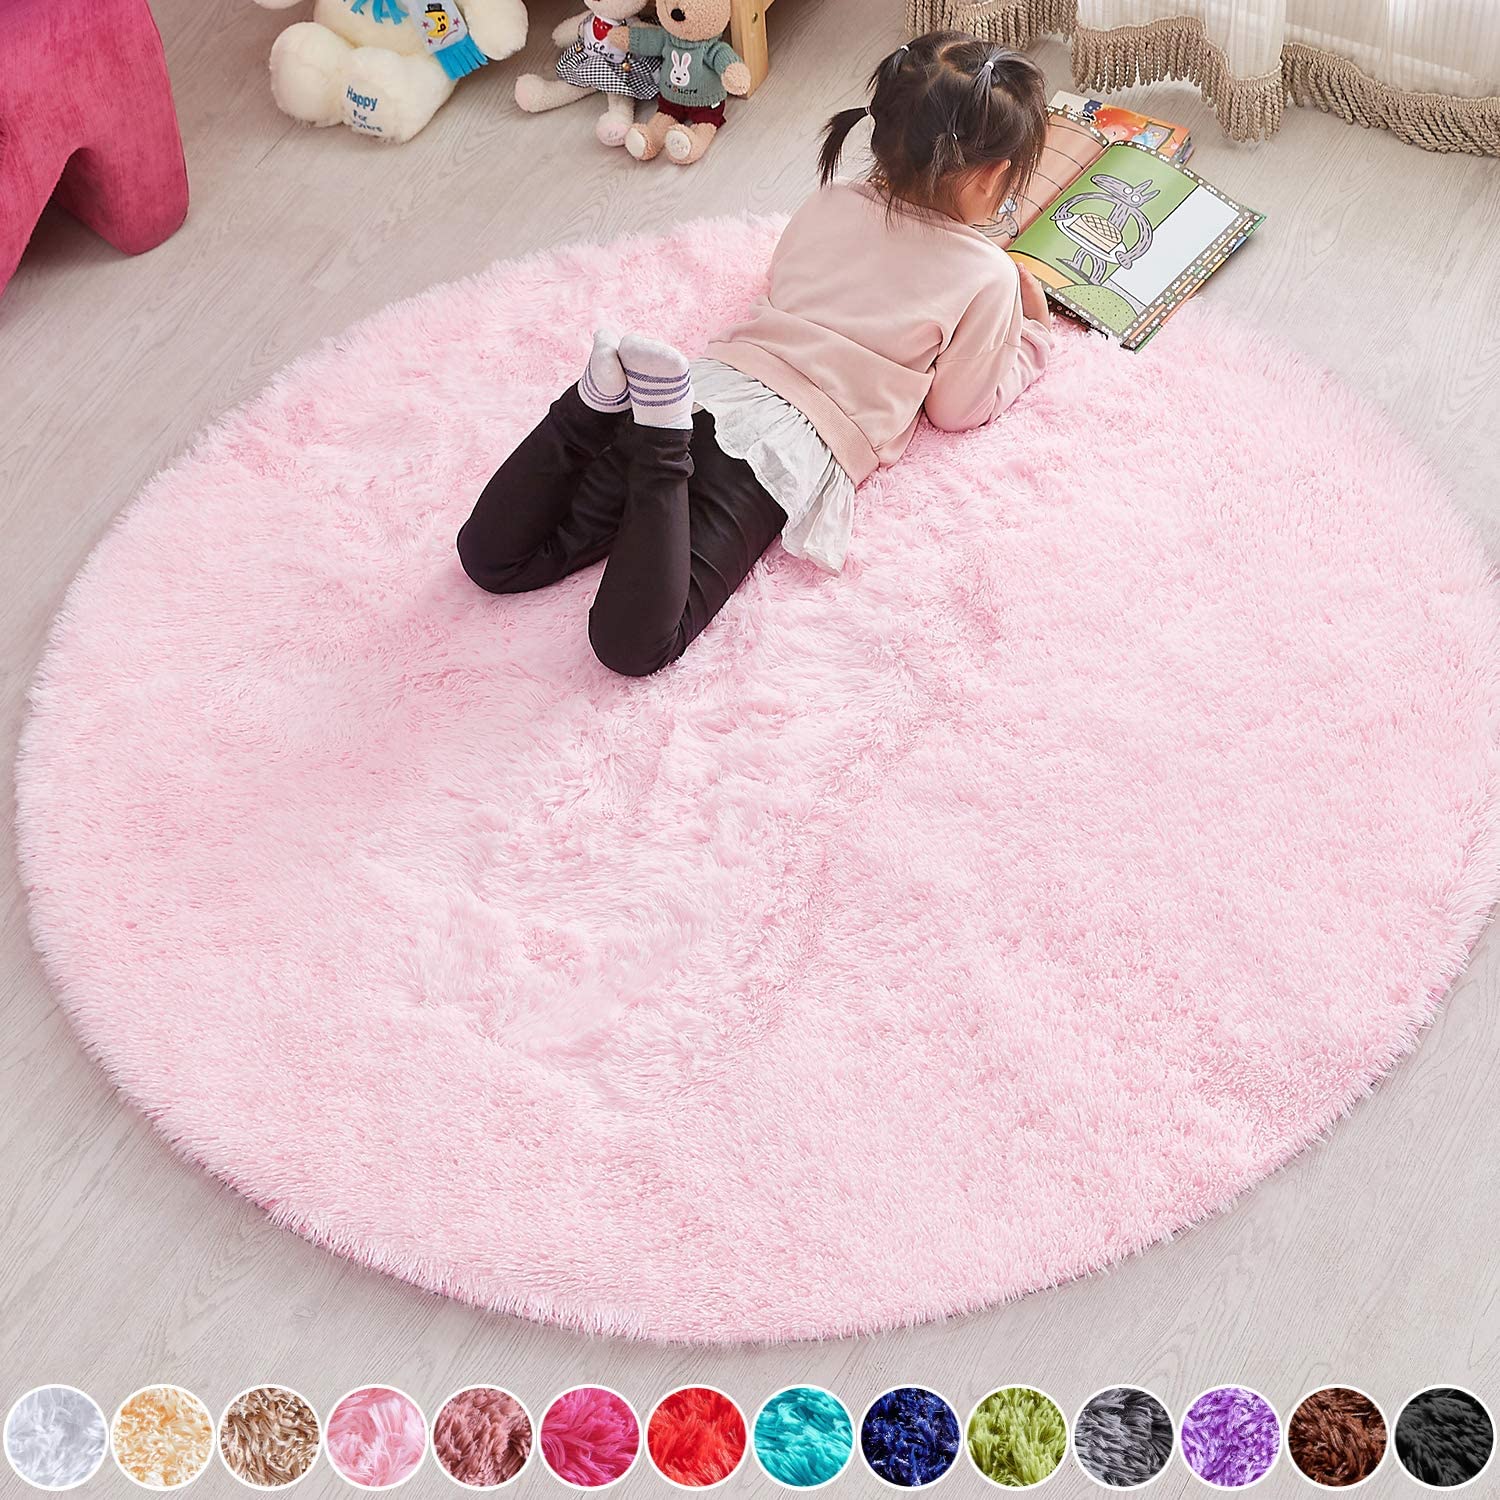 PAGISOFE Super Soft Circle Rugs for Girls Princess Castle Toddlers Play Tent 41” 